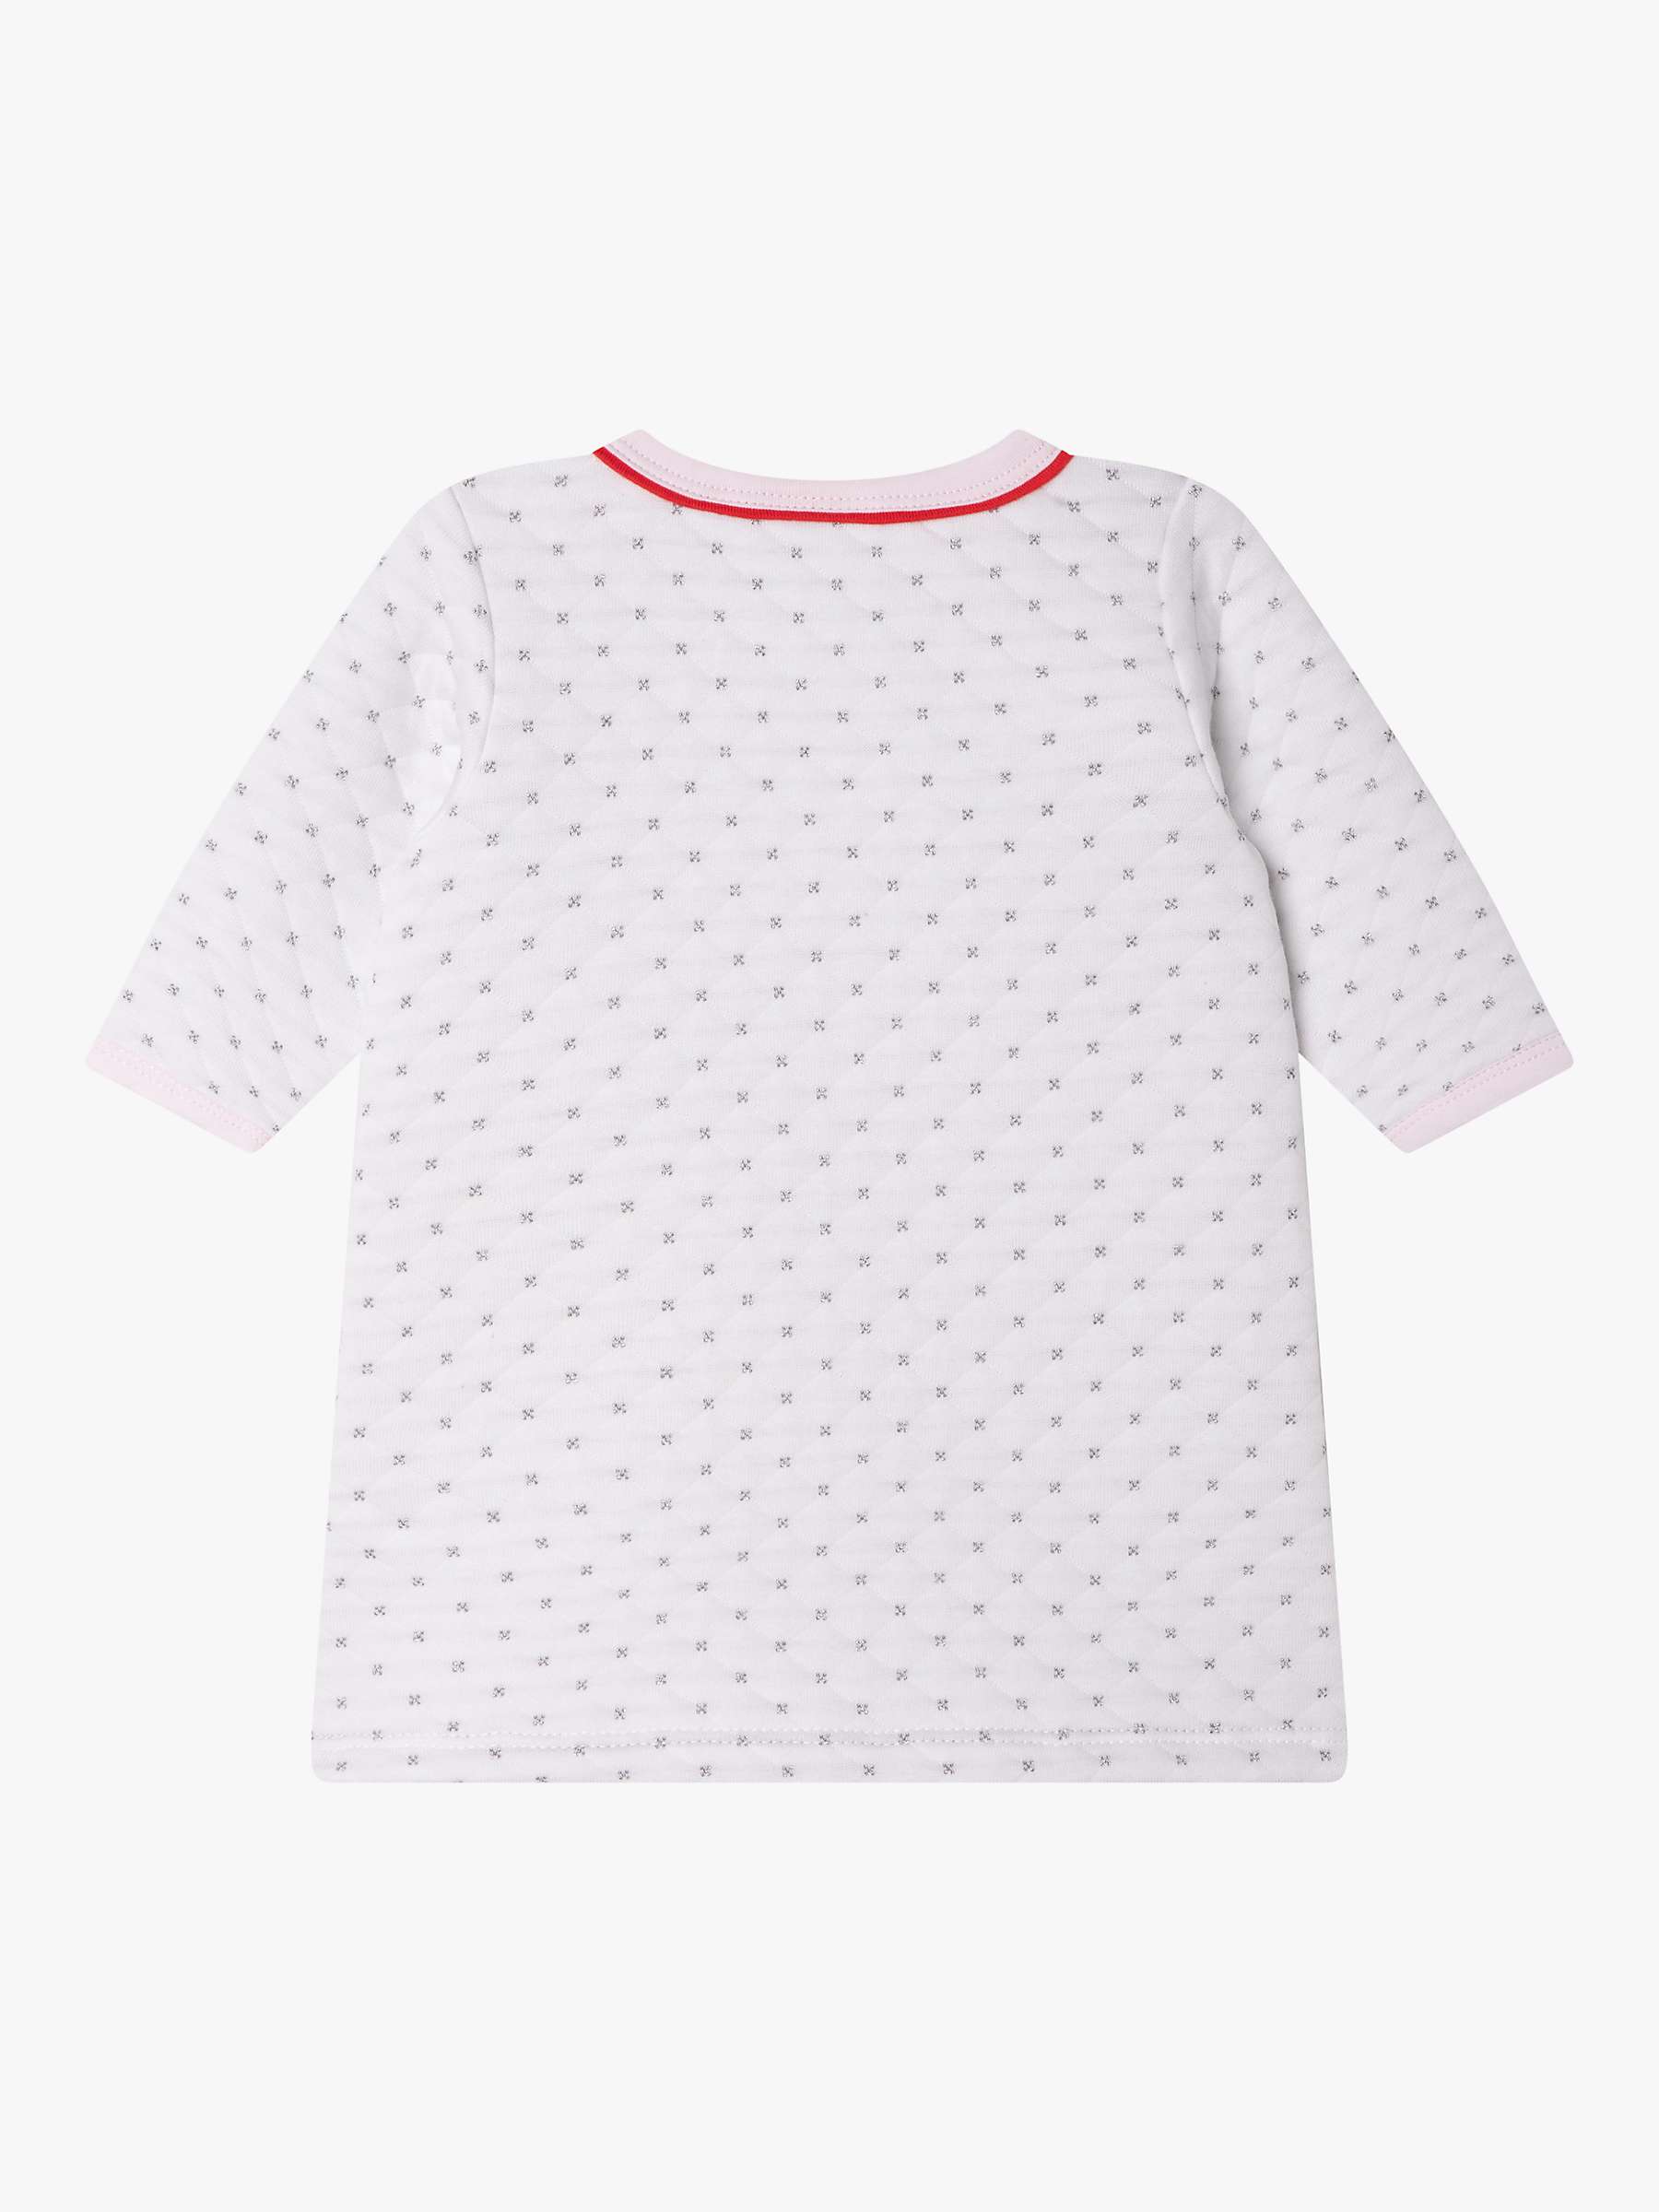 Buy HUGO BOSS Baby Quilted Dress, White Online at johnlewis.com